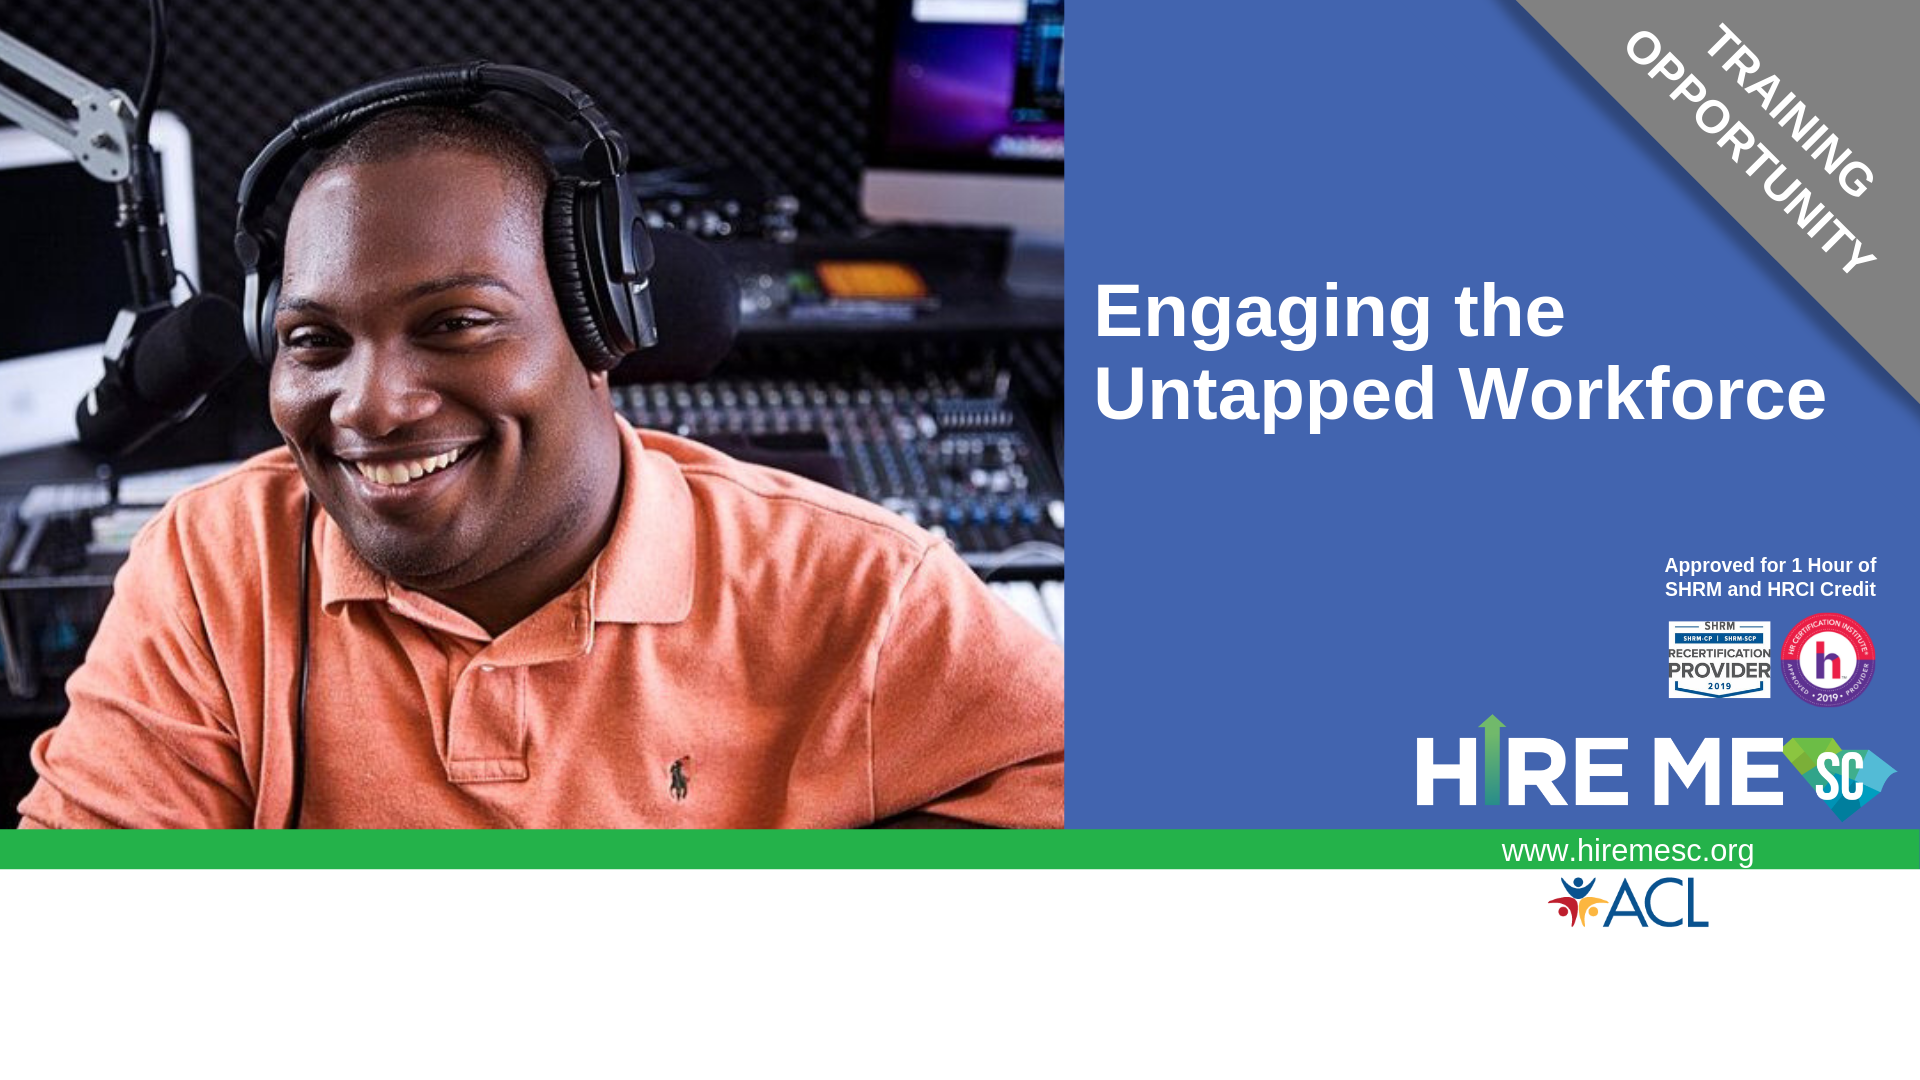 Engaging the untapped workforce image with a man with a disability in a radio studio with headphones on looking at the camera.